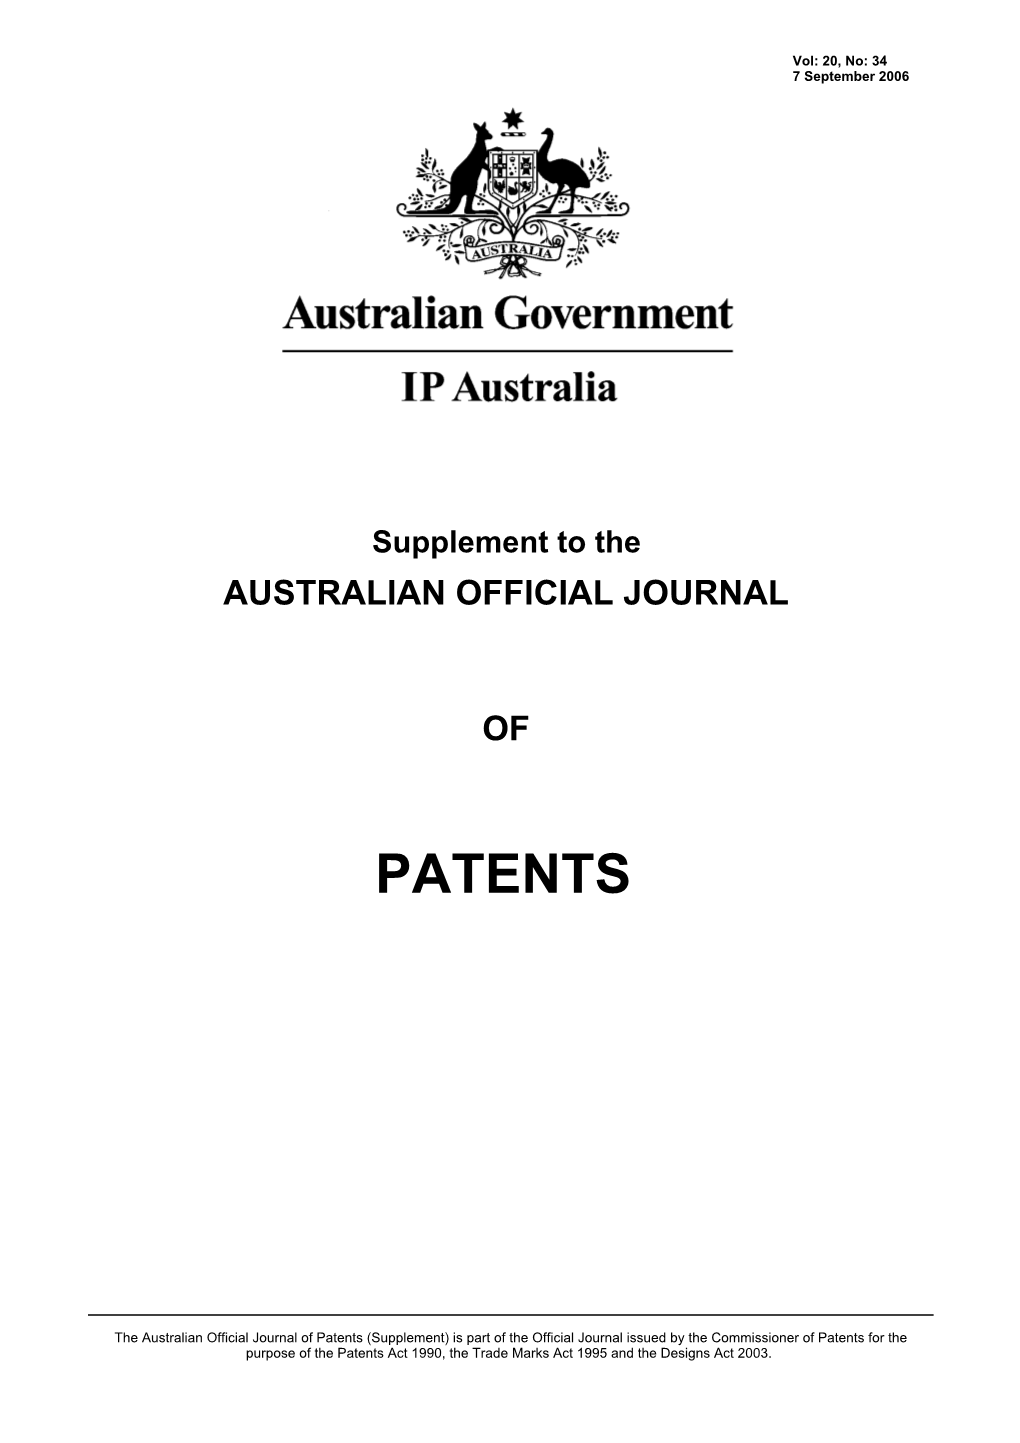 Supplement to the AUSTRALIAN OFFICIAL JOURNAL